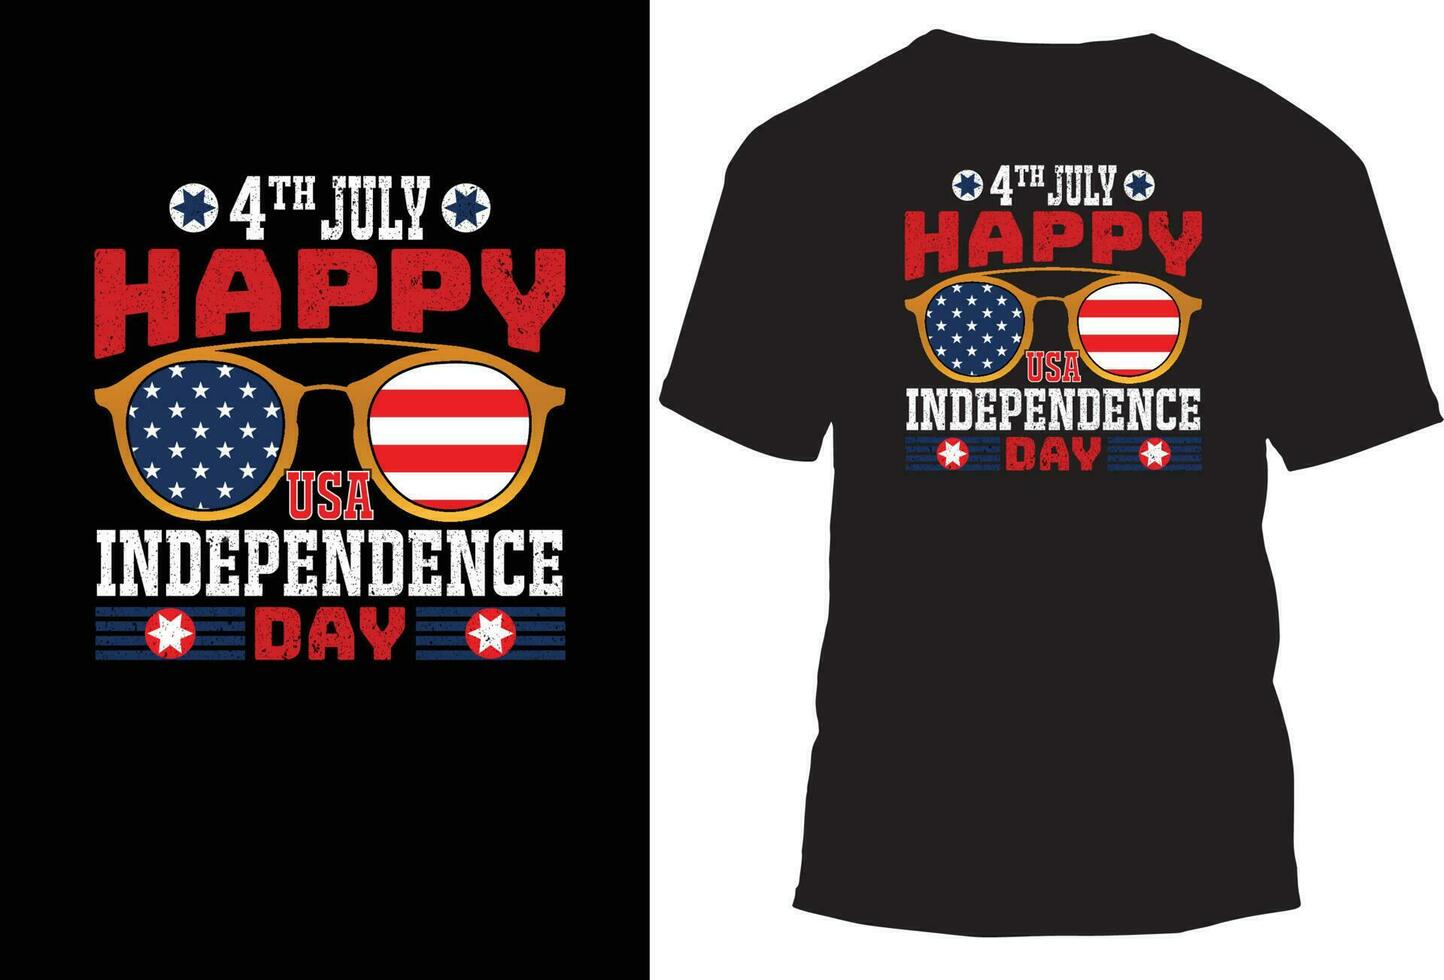 USA Independence Day T-Shirt Design vector